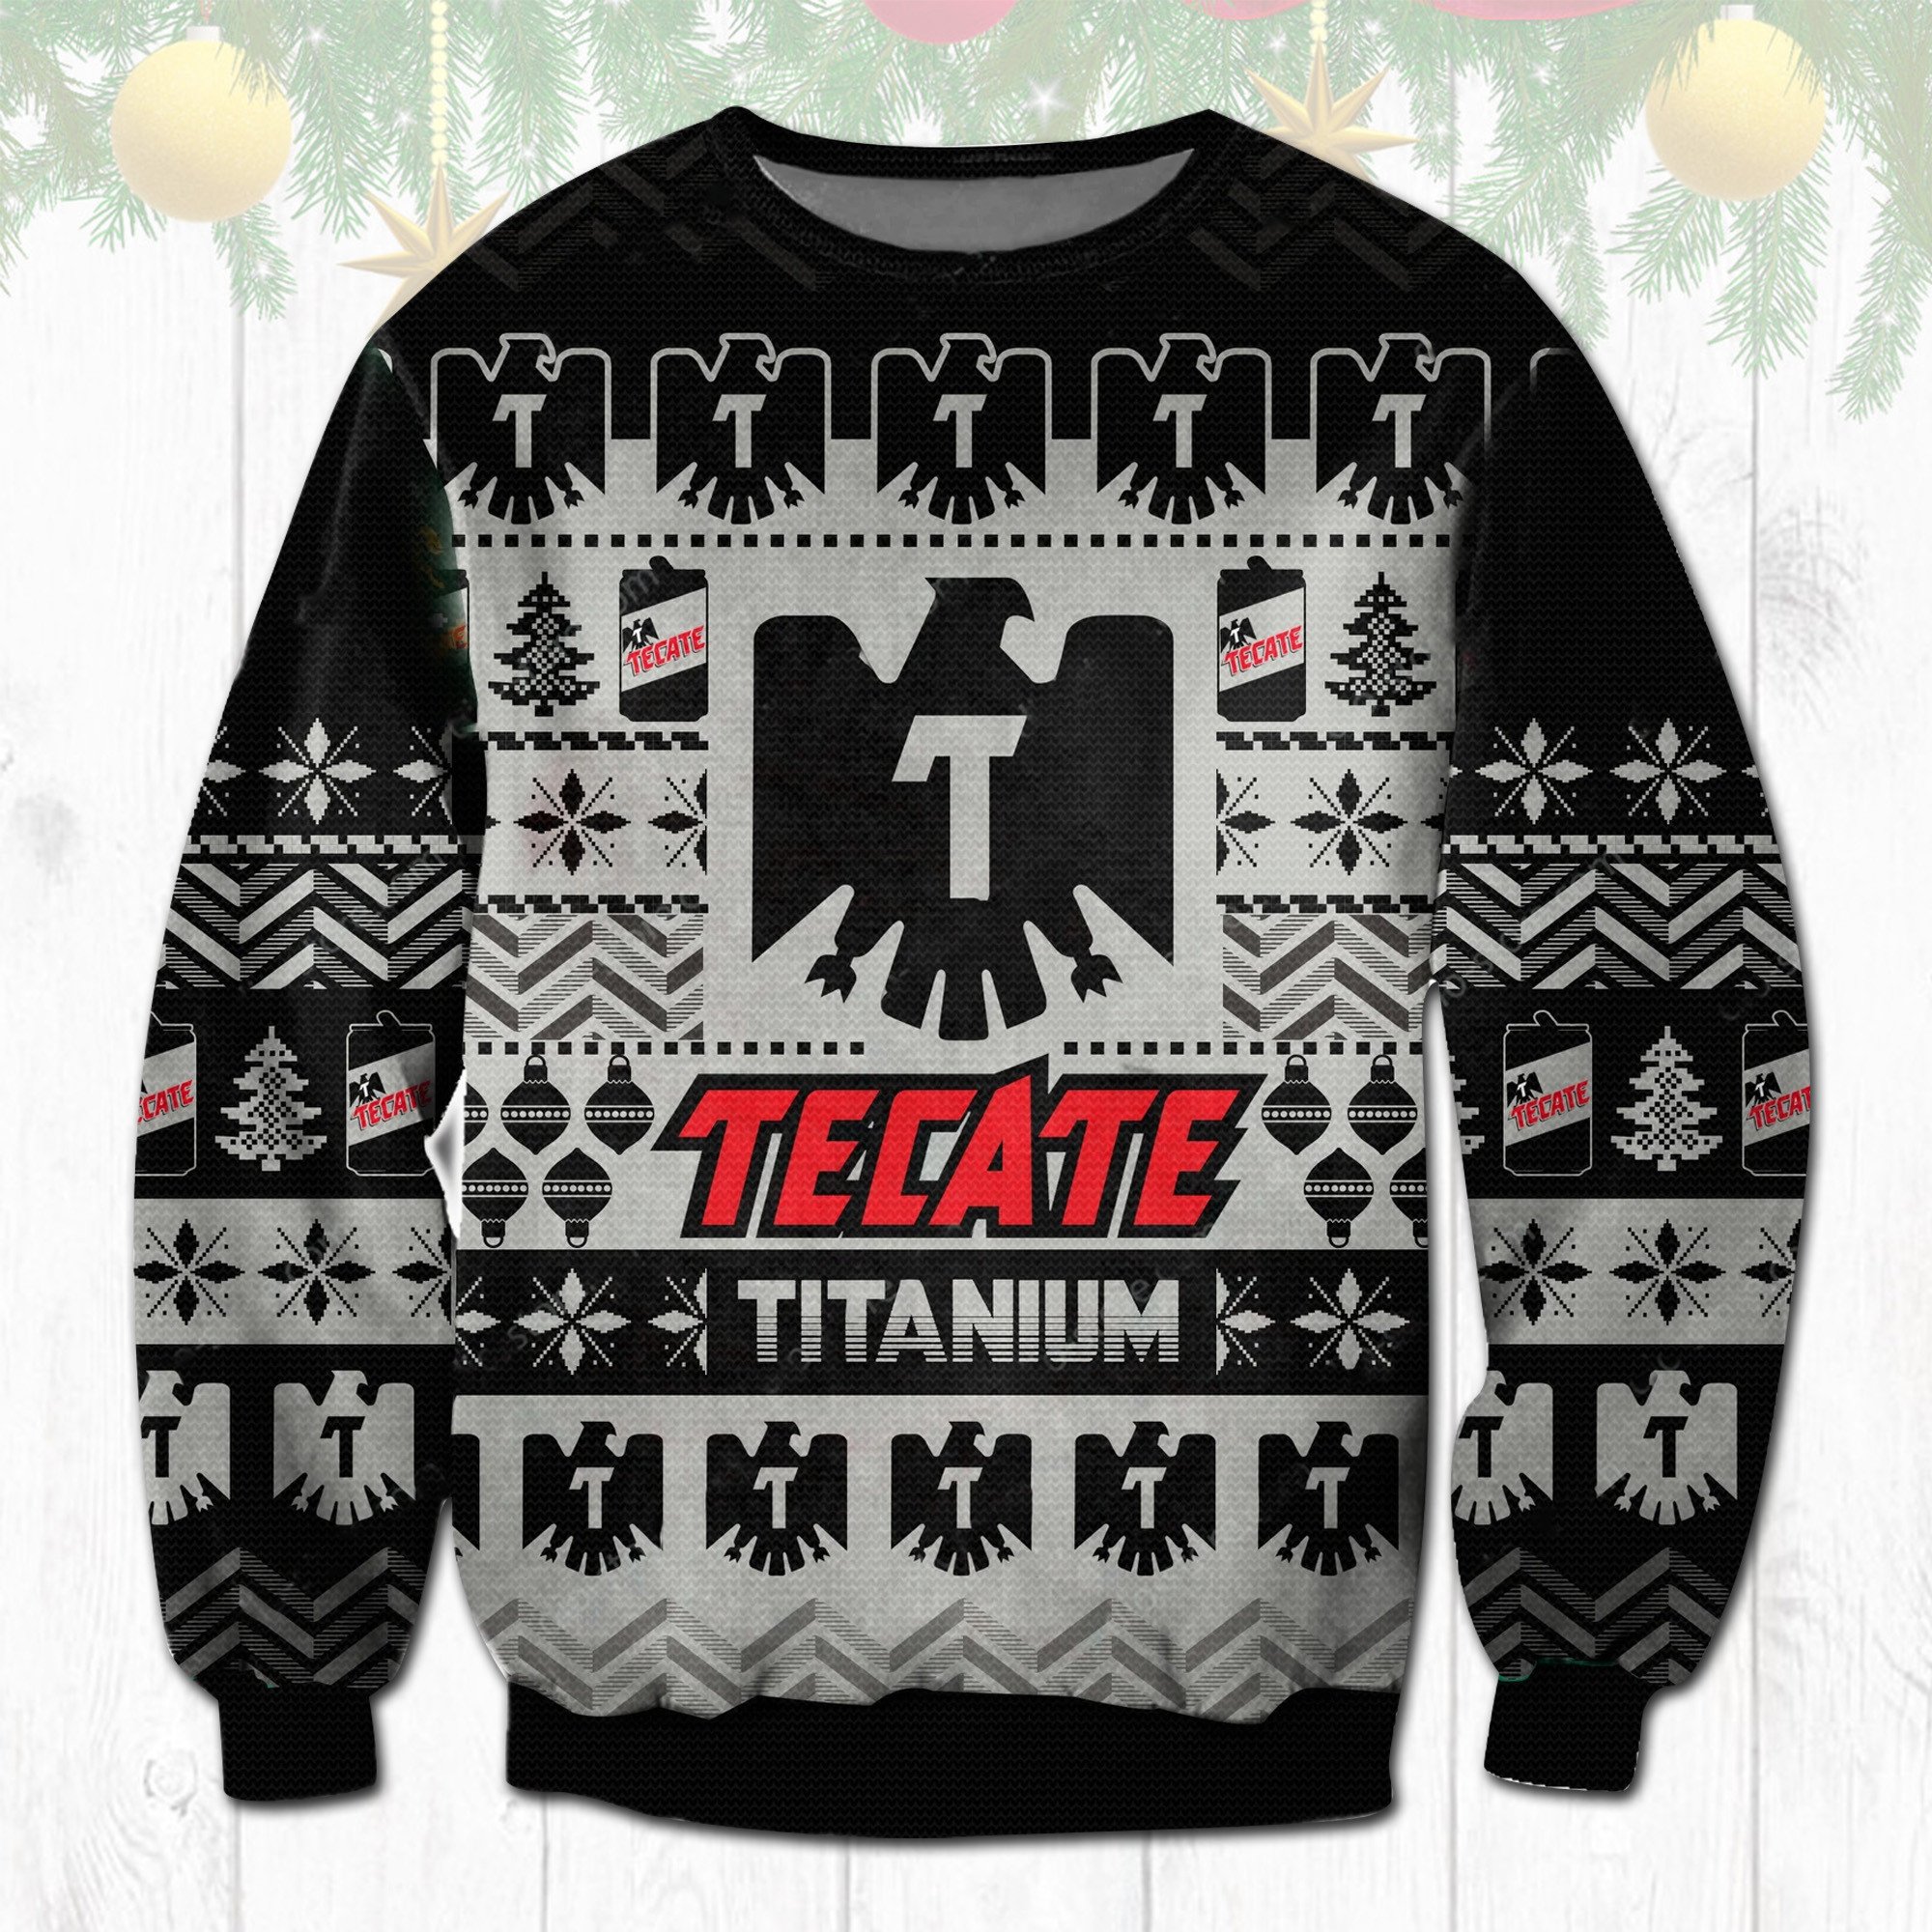 HOT Tecate Titanium Beer ugly Christmas sweater 1